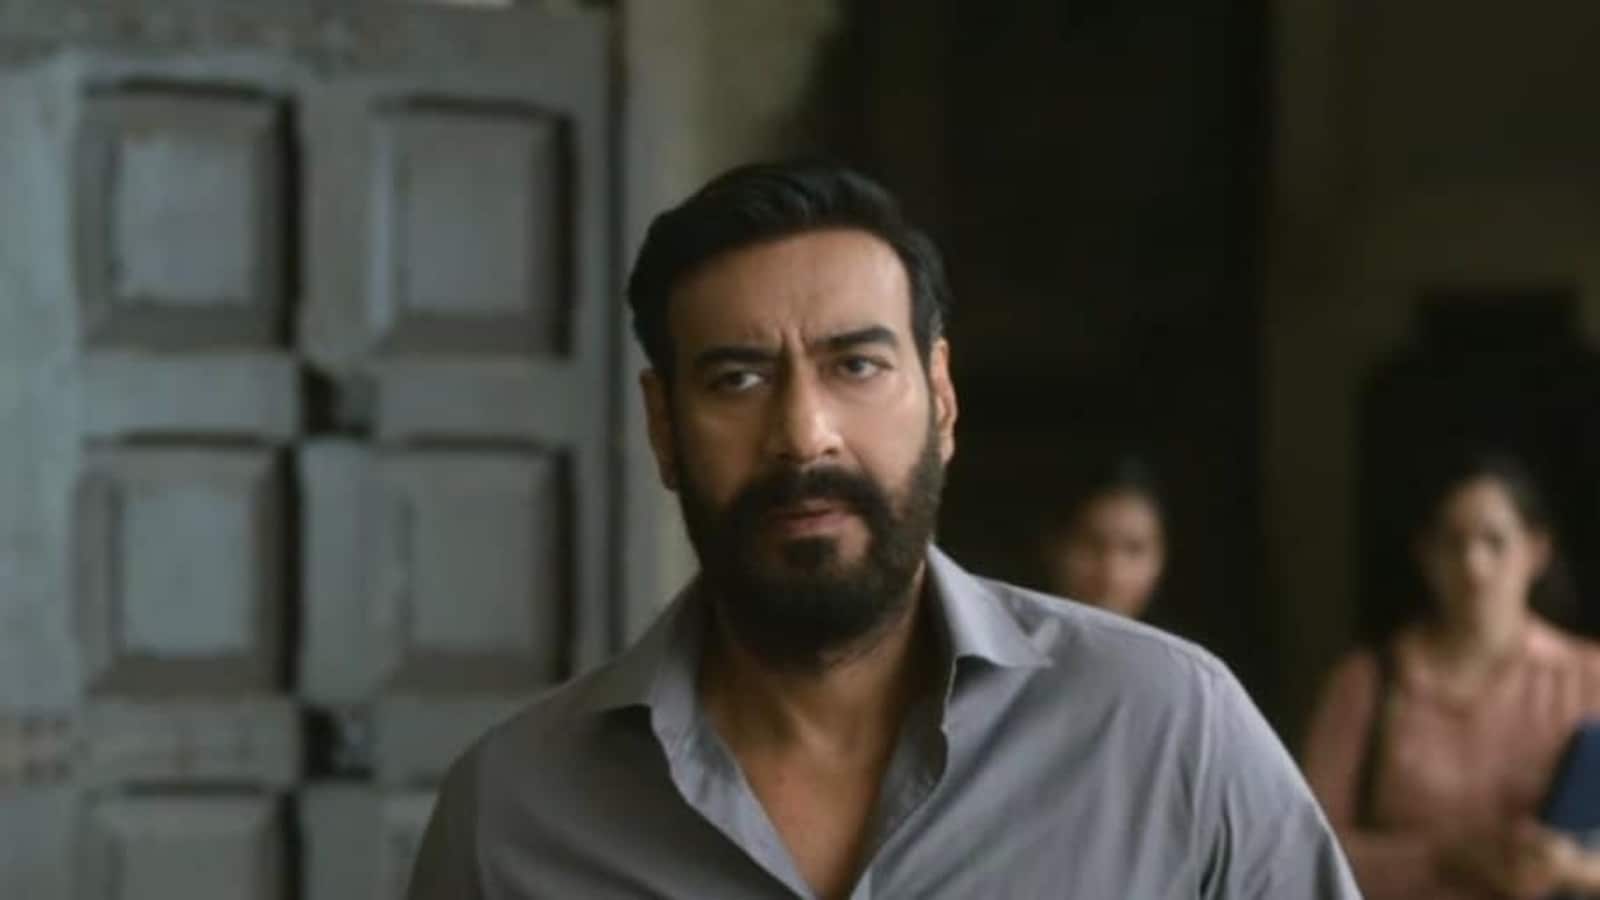 Drishyam 2 collects ₹3 crore in advance booking, shows promise for day 1